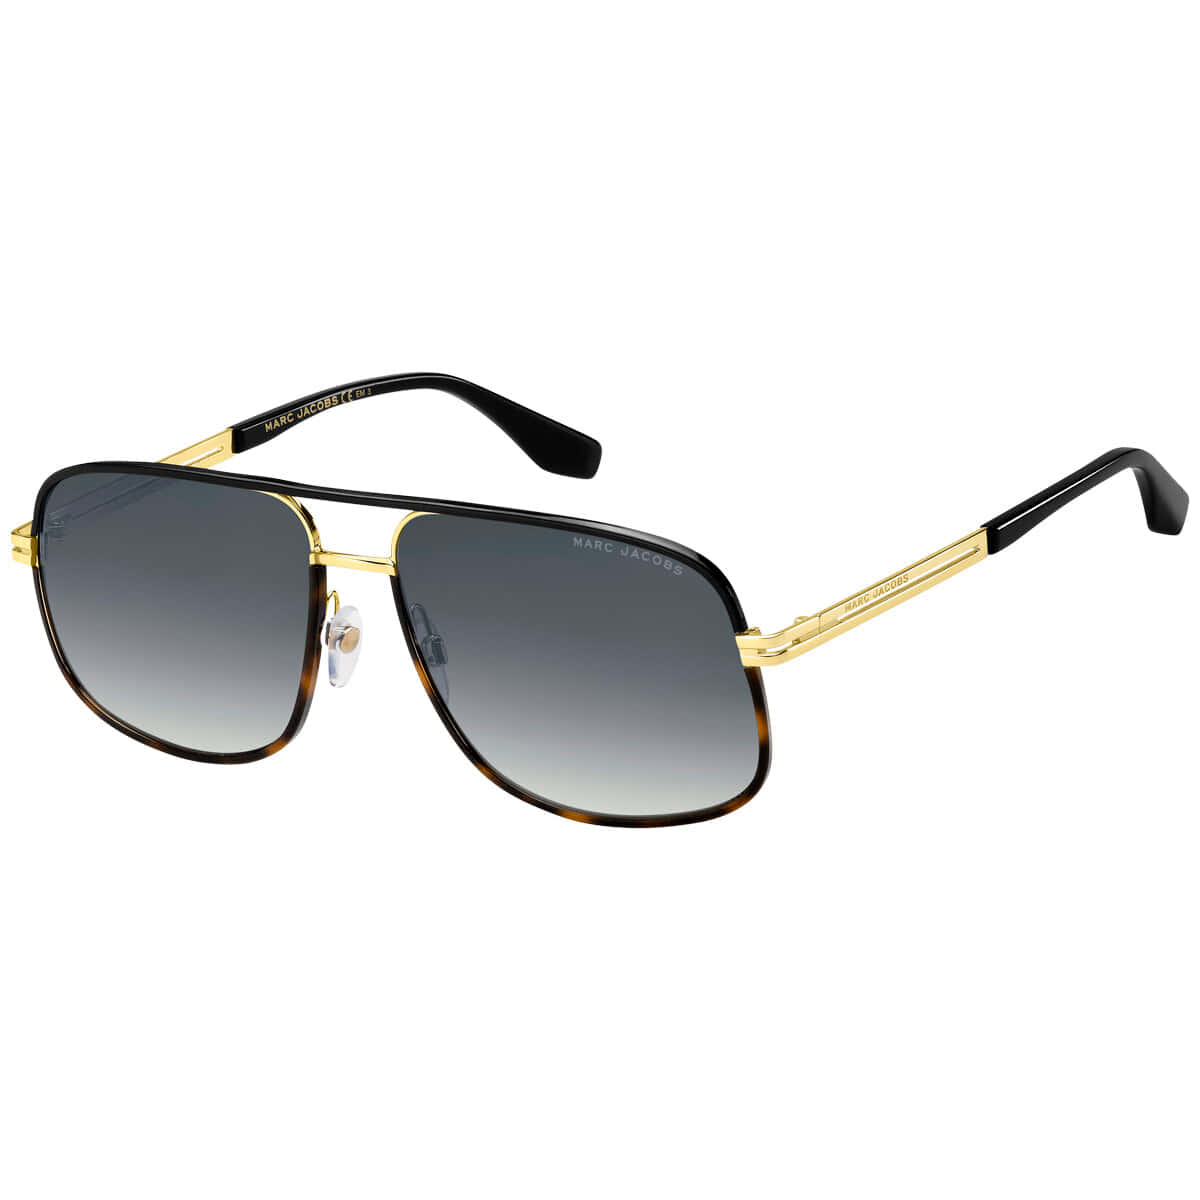 The Sunglasses Are Gold And Black With A Grey Gradient